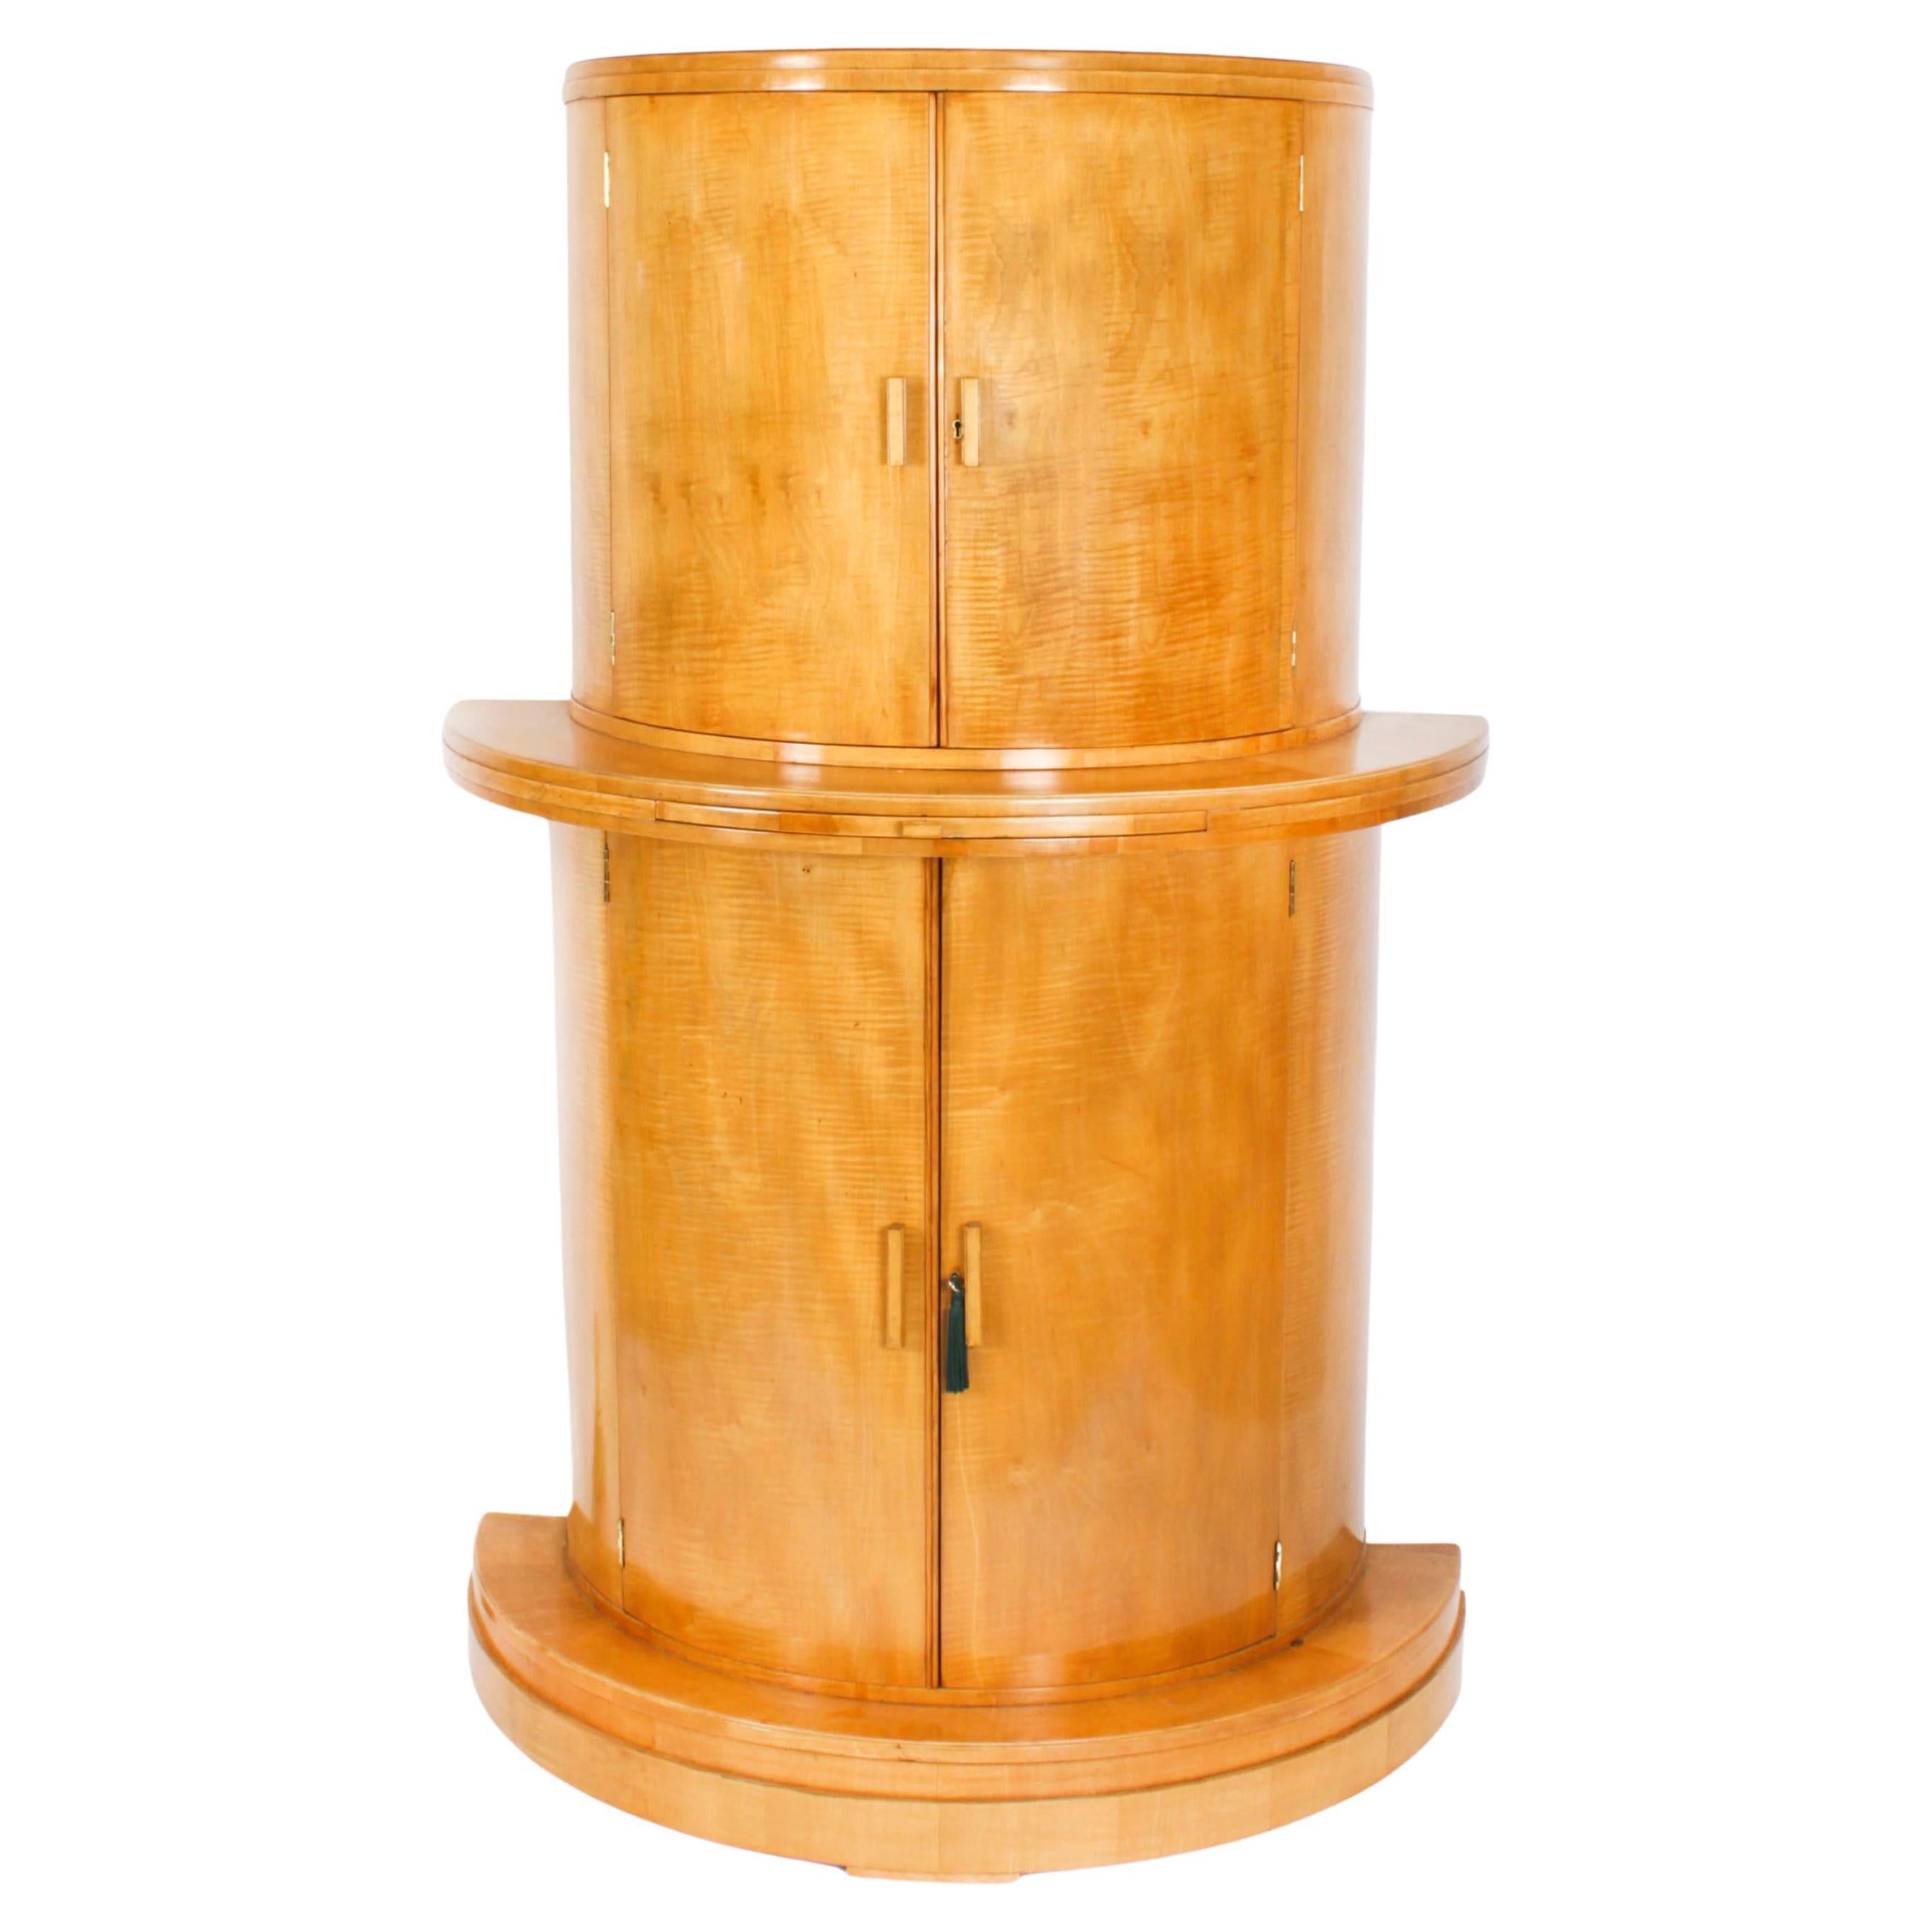 Antique Art Deco Satinwood Cocktail Cabinet by Hille & Glassware 1920s For Sale